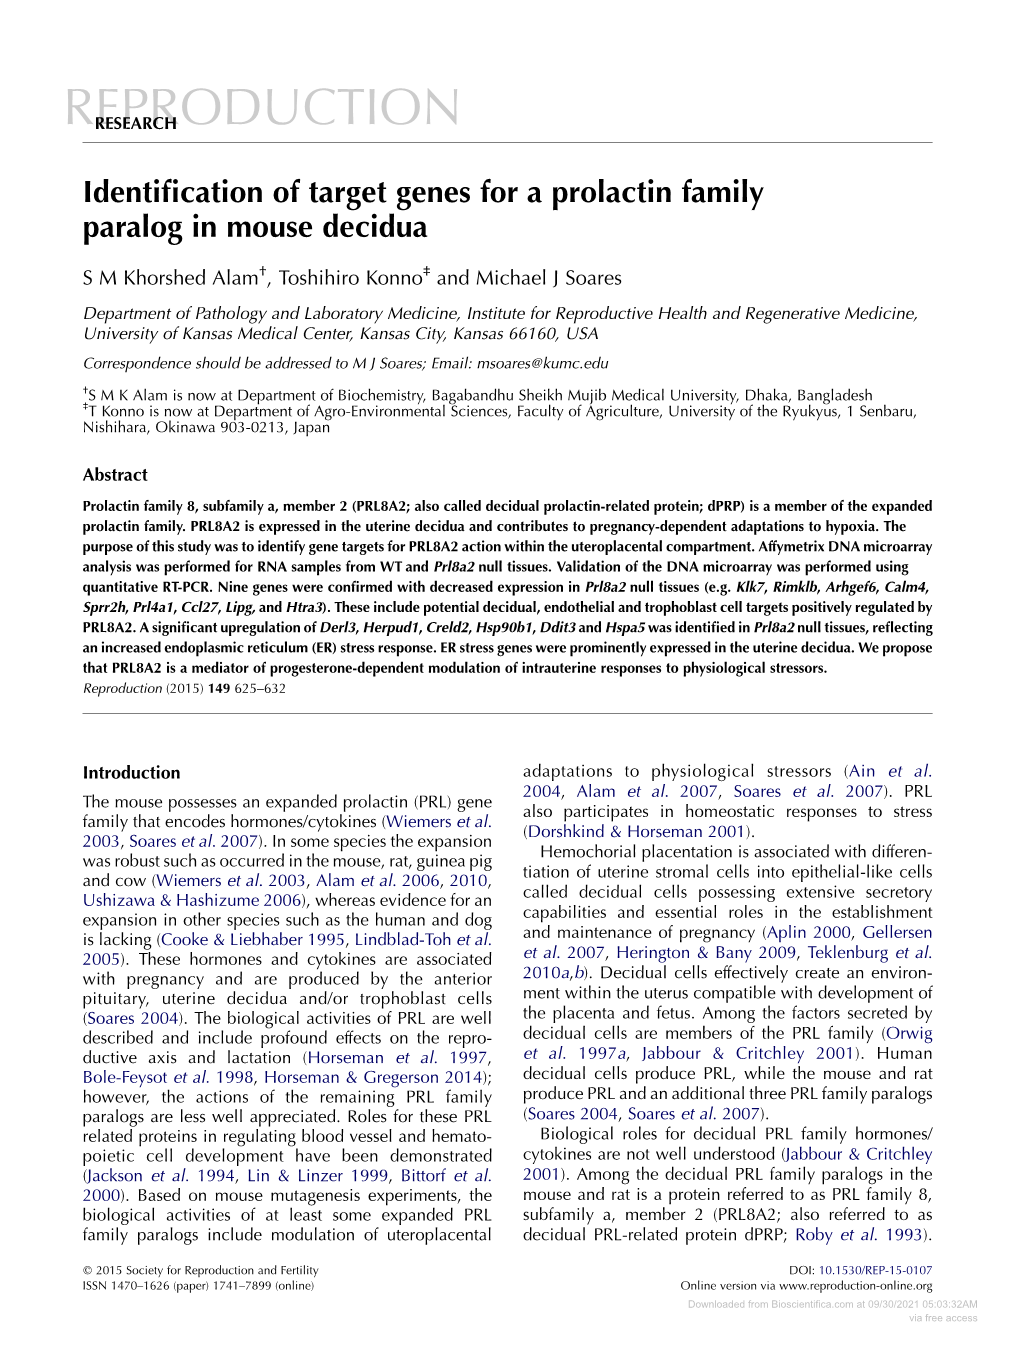 Identification of Target Genes for a Prolactin Family Paralog in Mouse